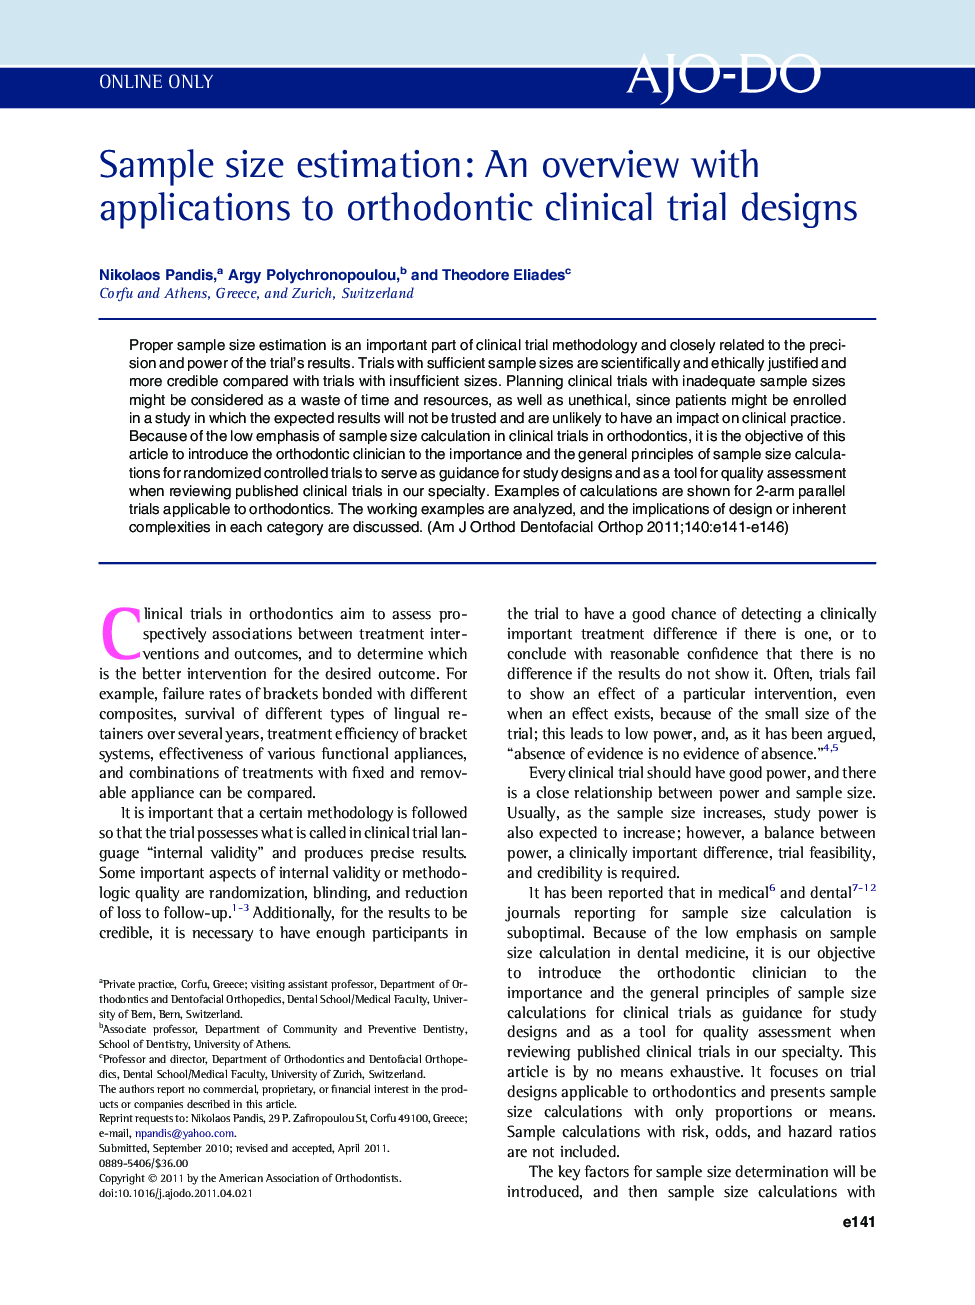 Sample size estimation: An overview with applications to orthodontic clinical trial designs 